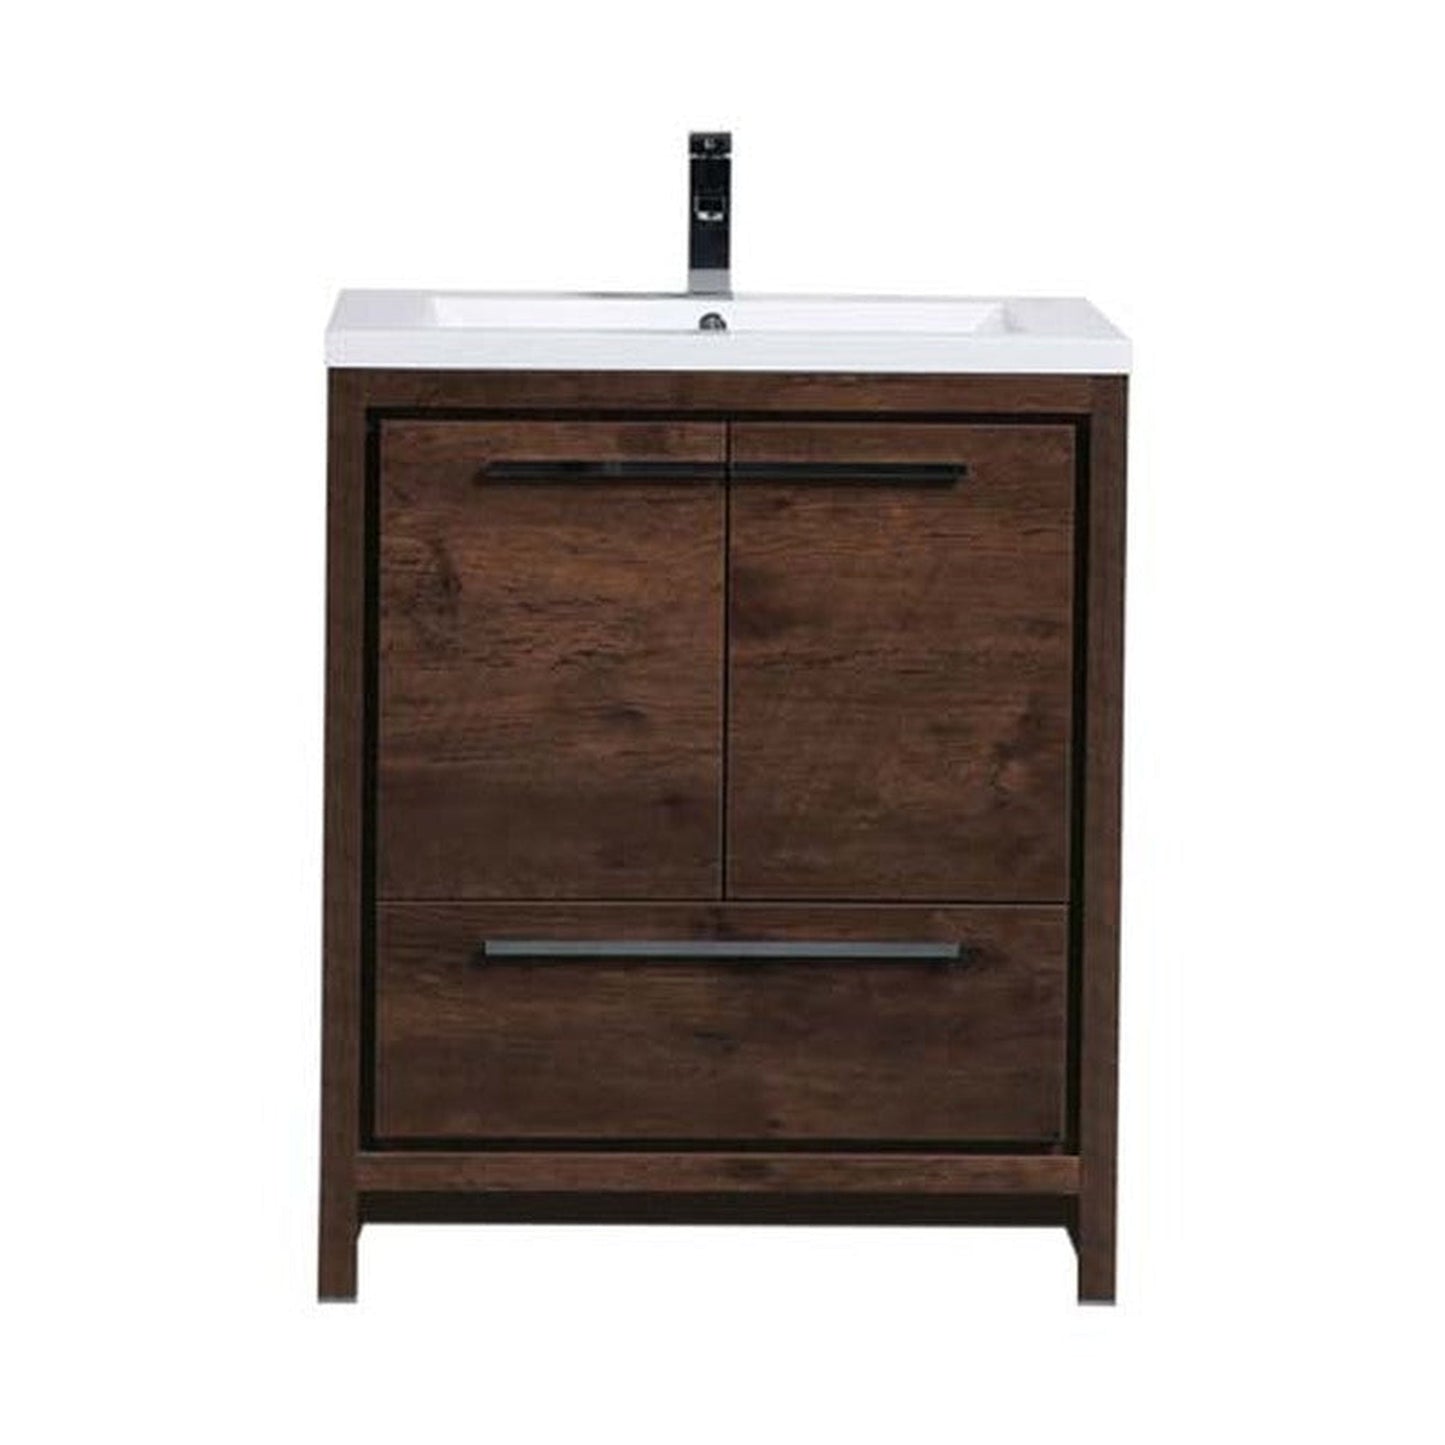 Moreno Bath Dolce 30" Rosewood Freestanding Vanity With Single Reinforced White Acrylic Sink